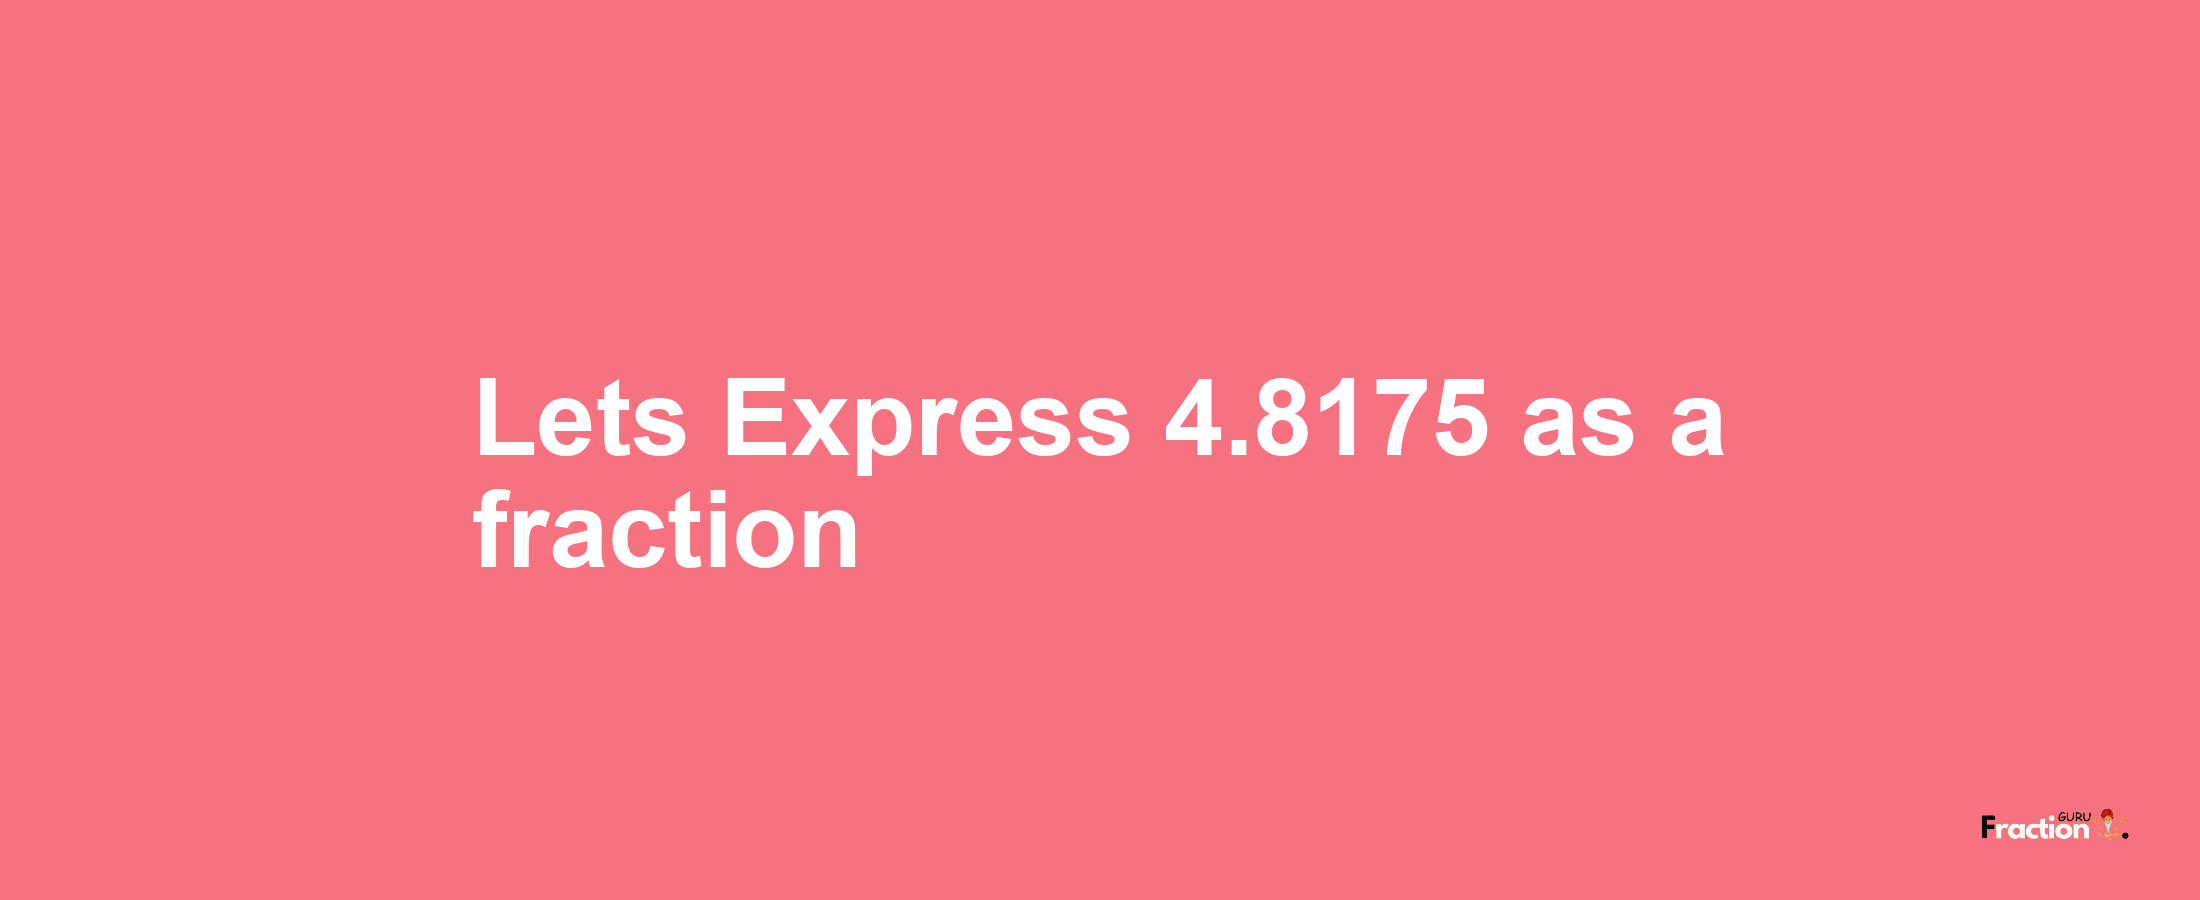 Lets Express 4.8175 as afraction